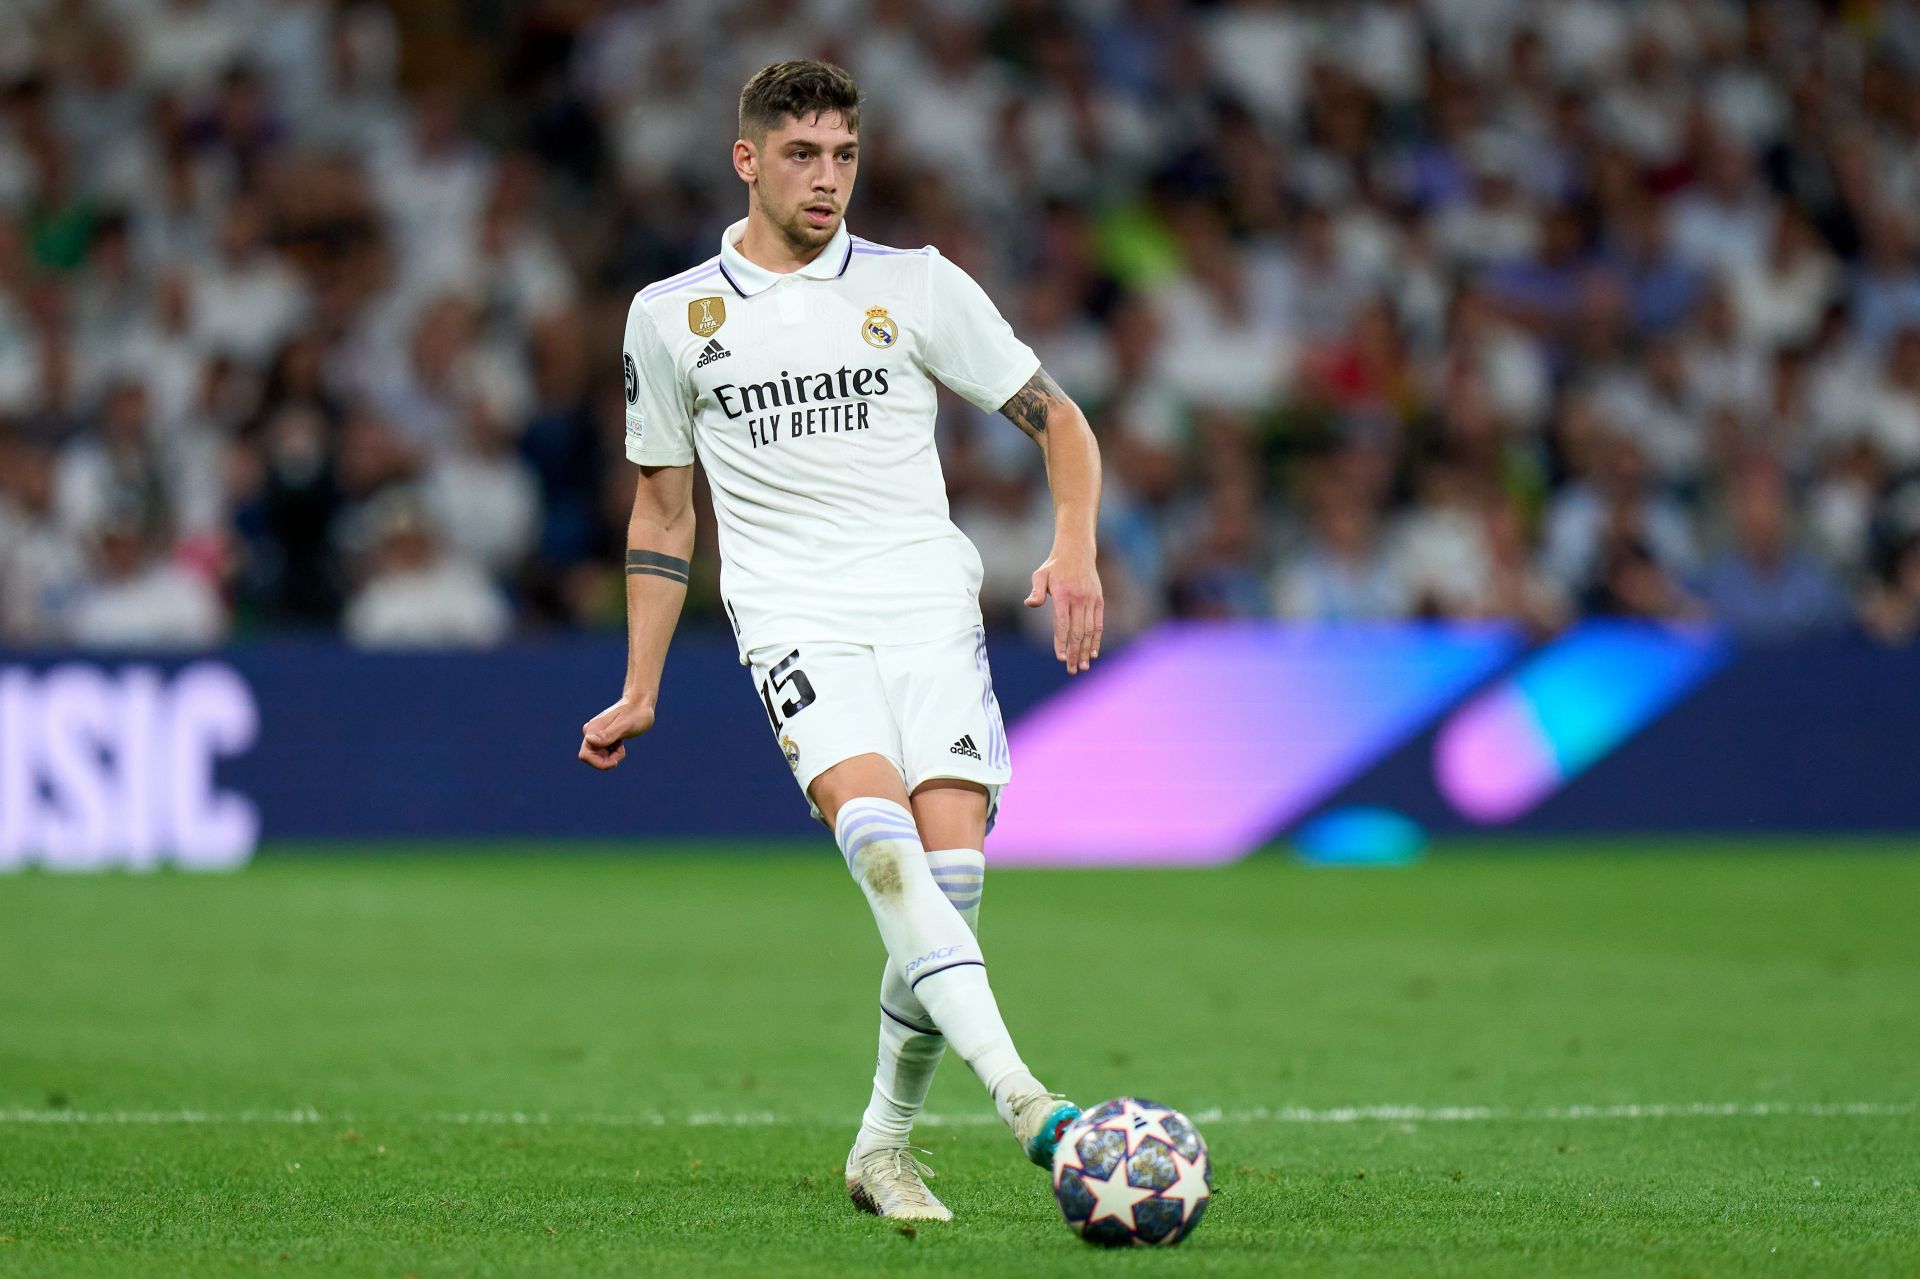 Federico Valverde is unlikely to leave the Santiago Bernabeu this summer